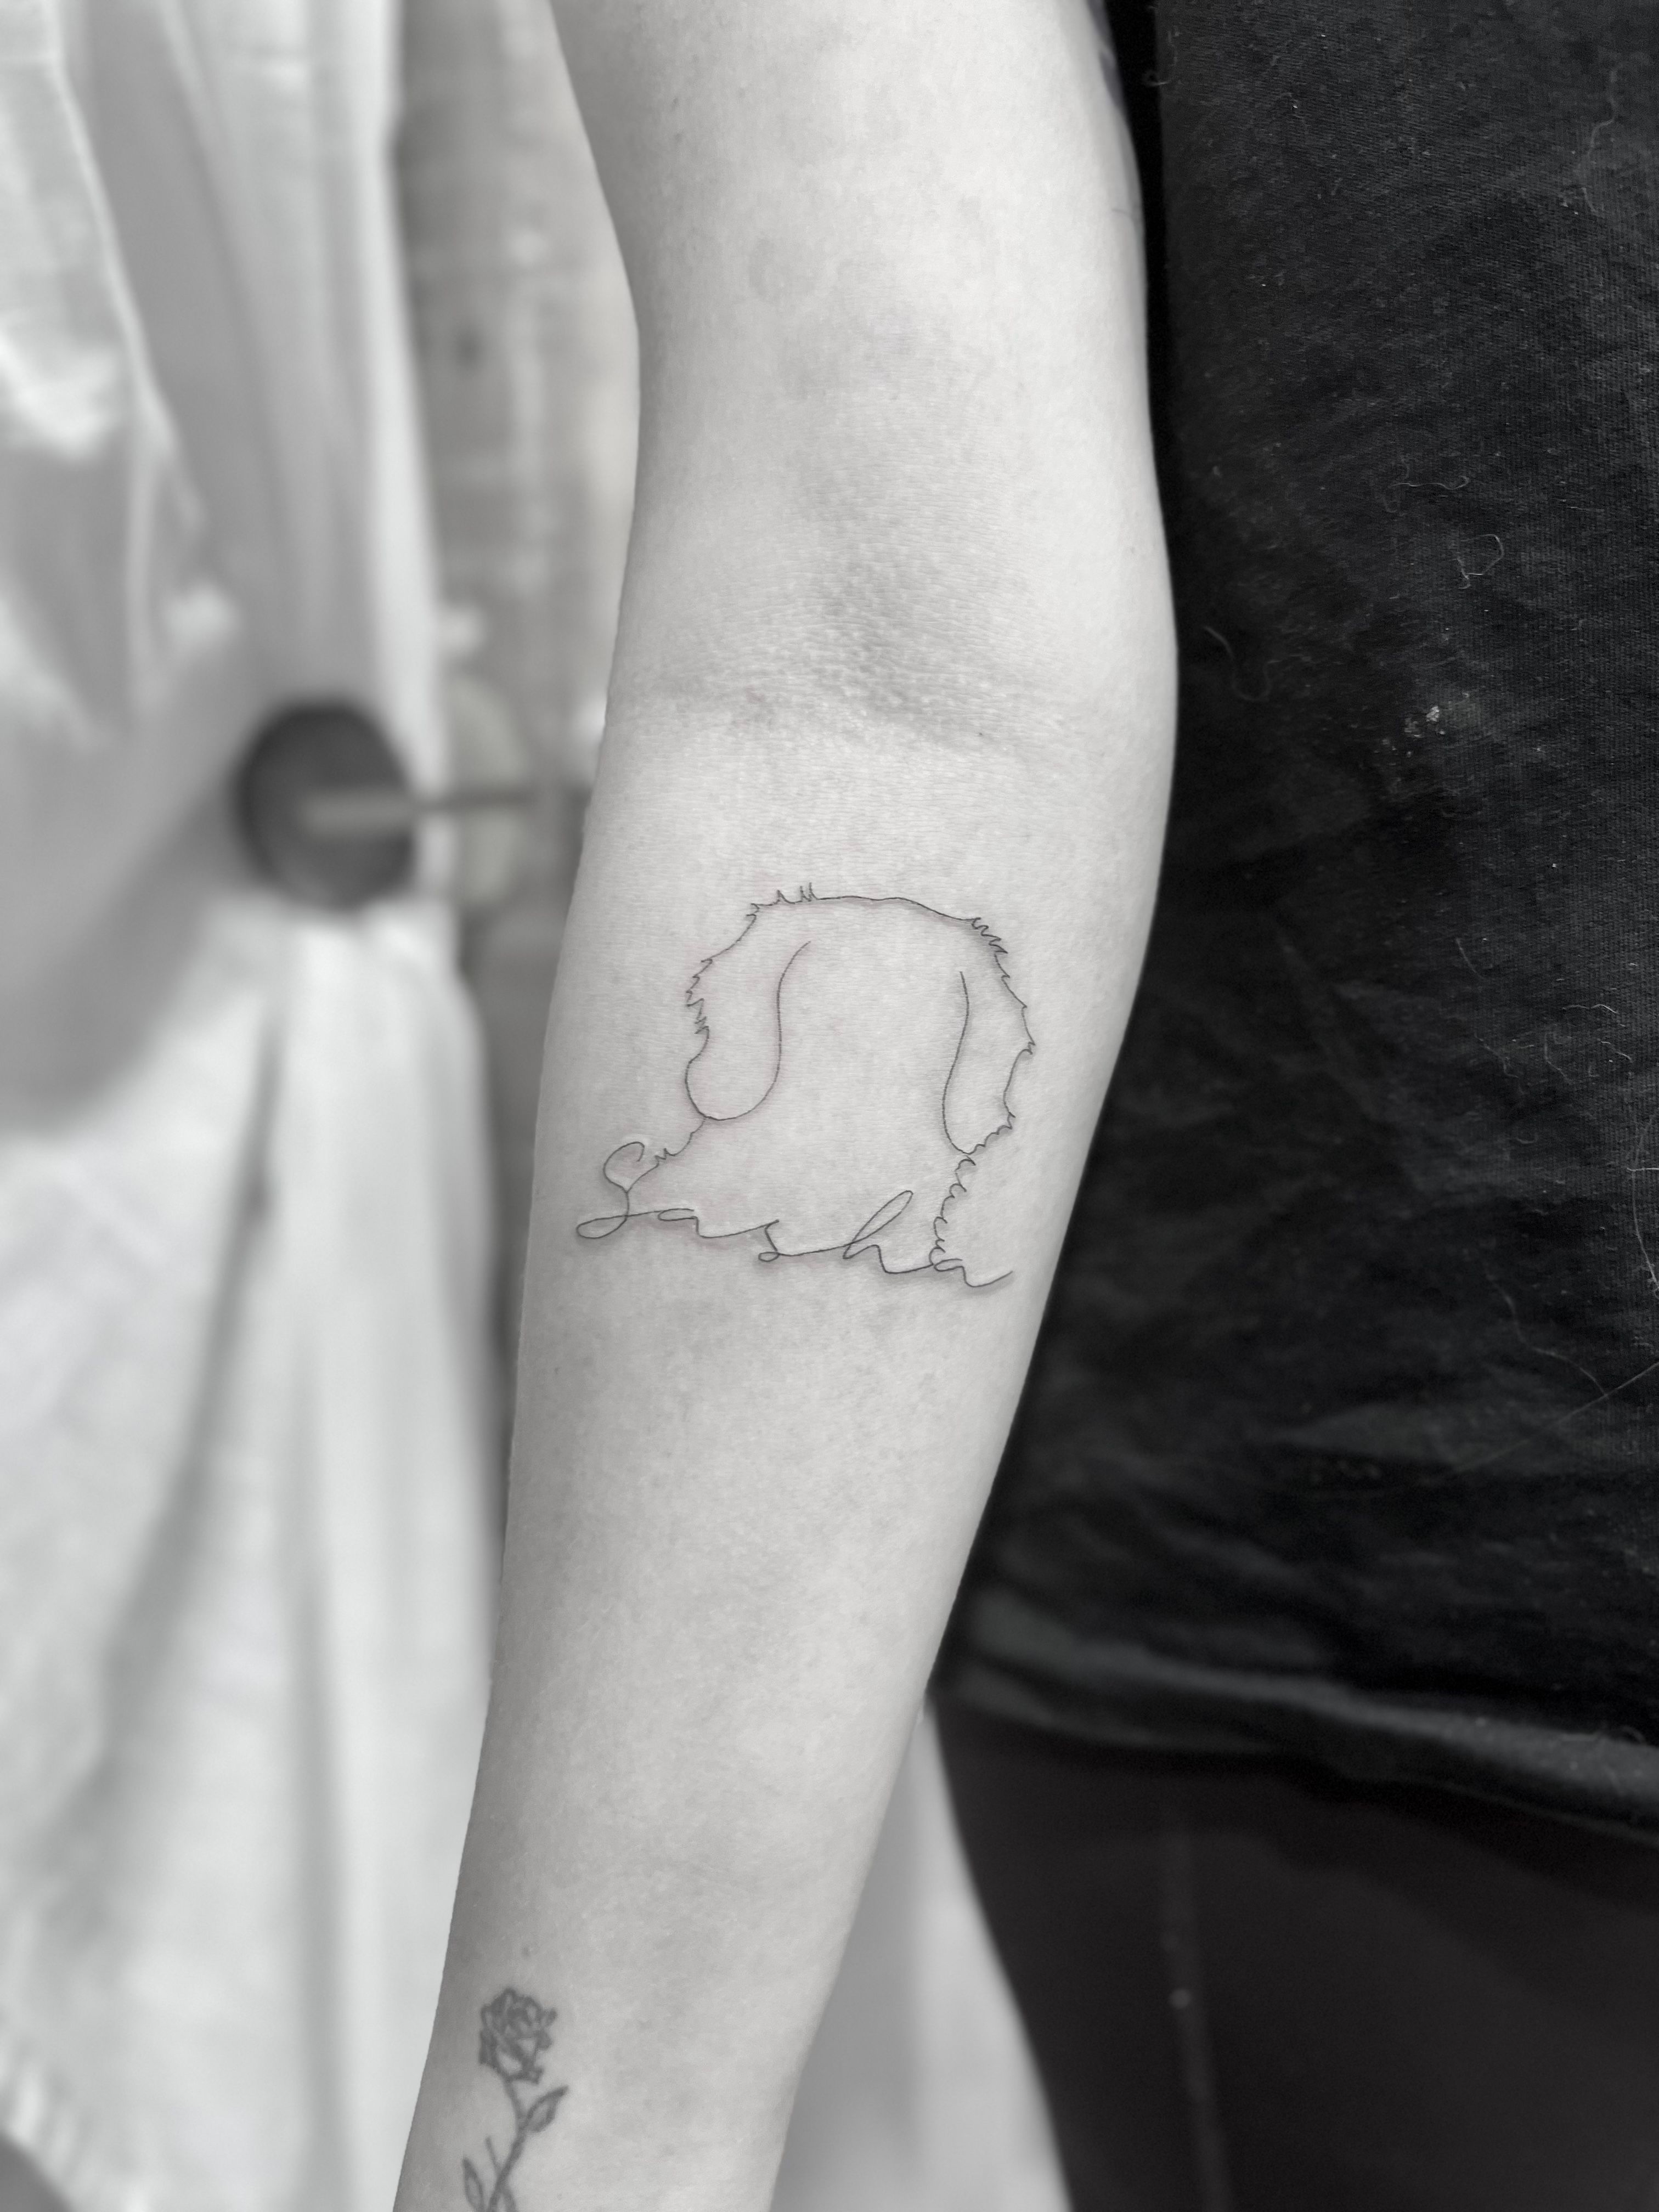 Buy Small Sheep Temporary Tattoo Online in India - Etsy